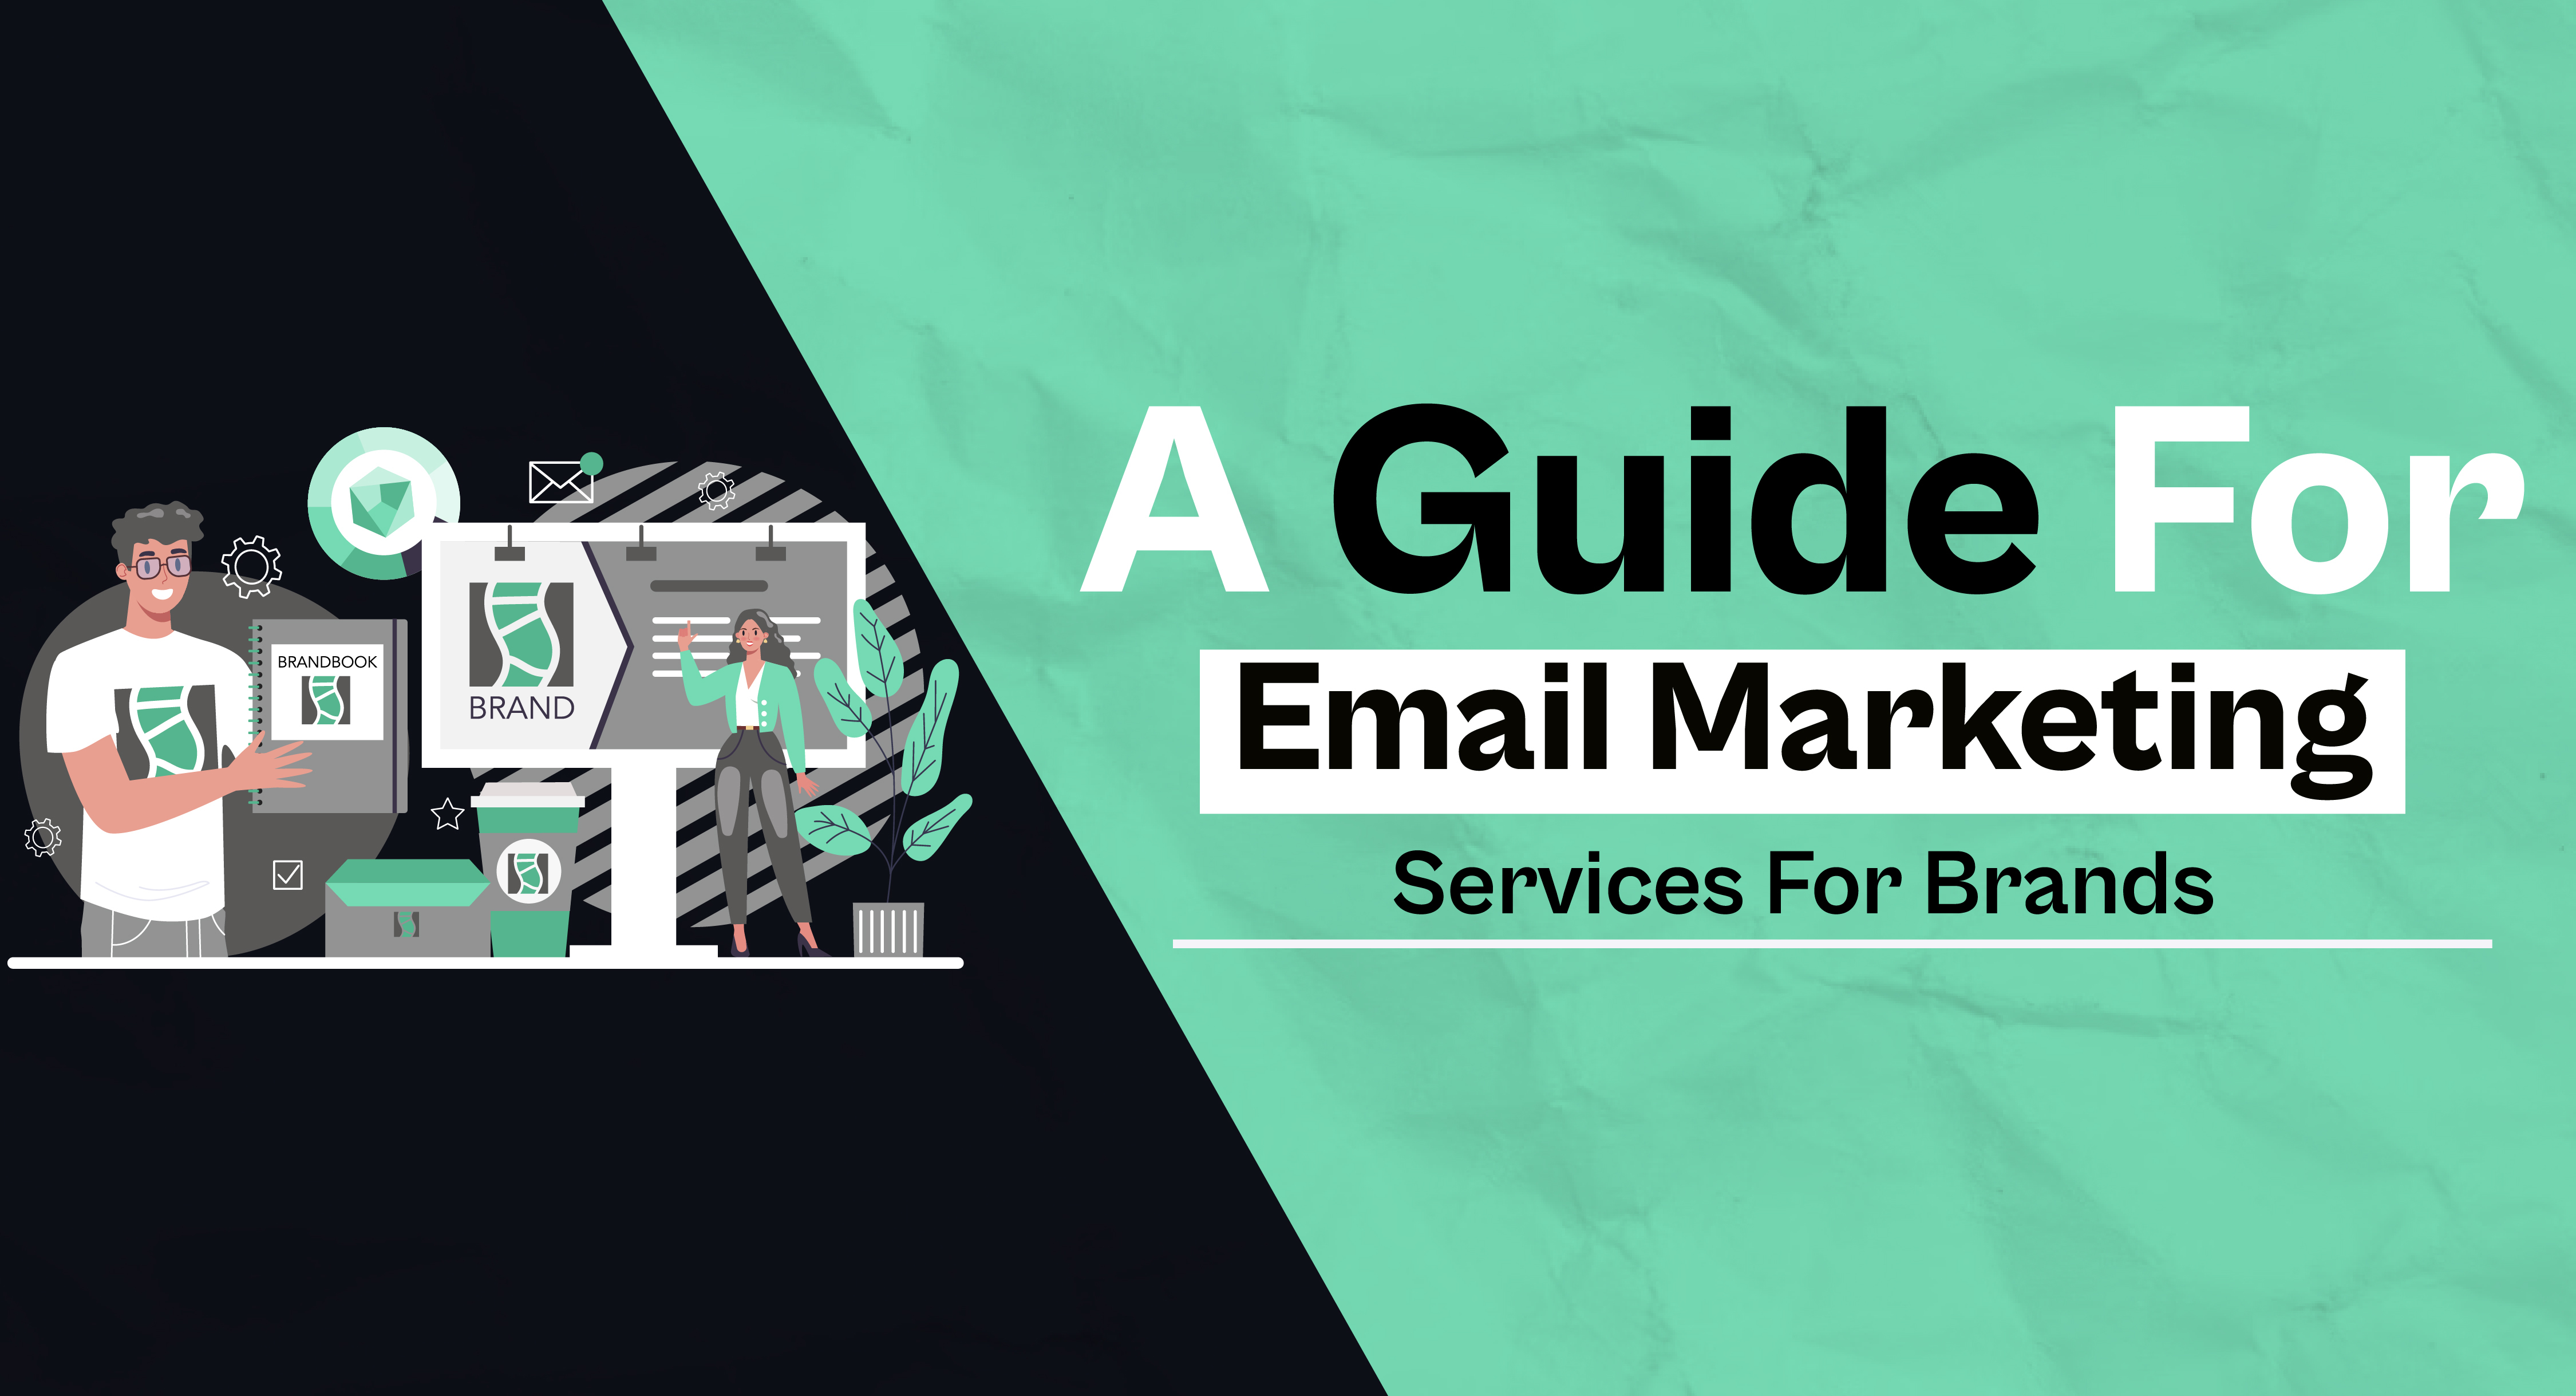 email marketing services promote your brand